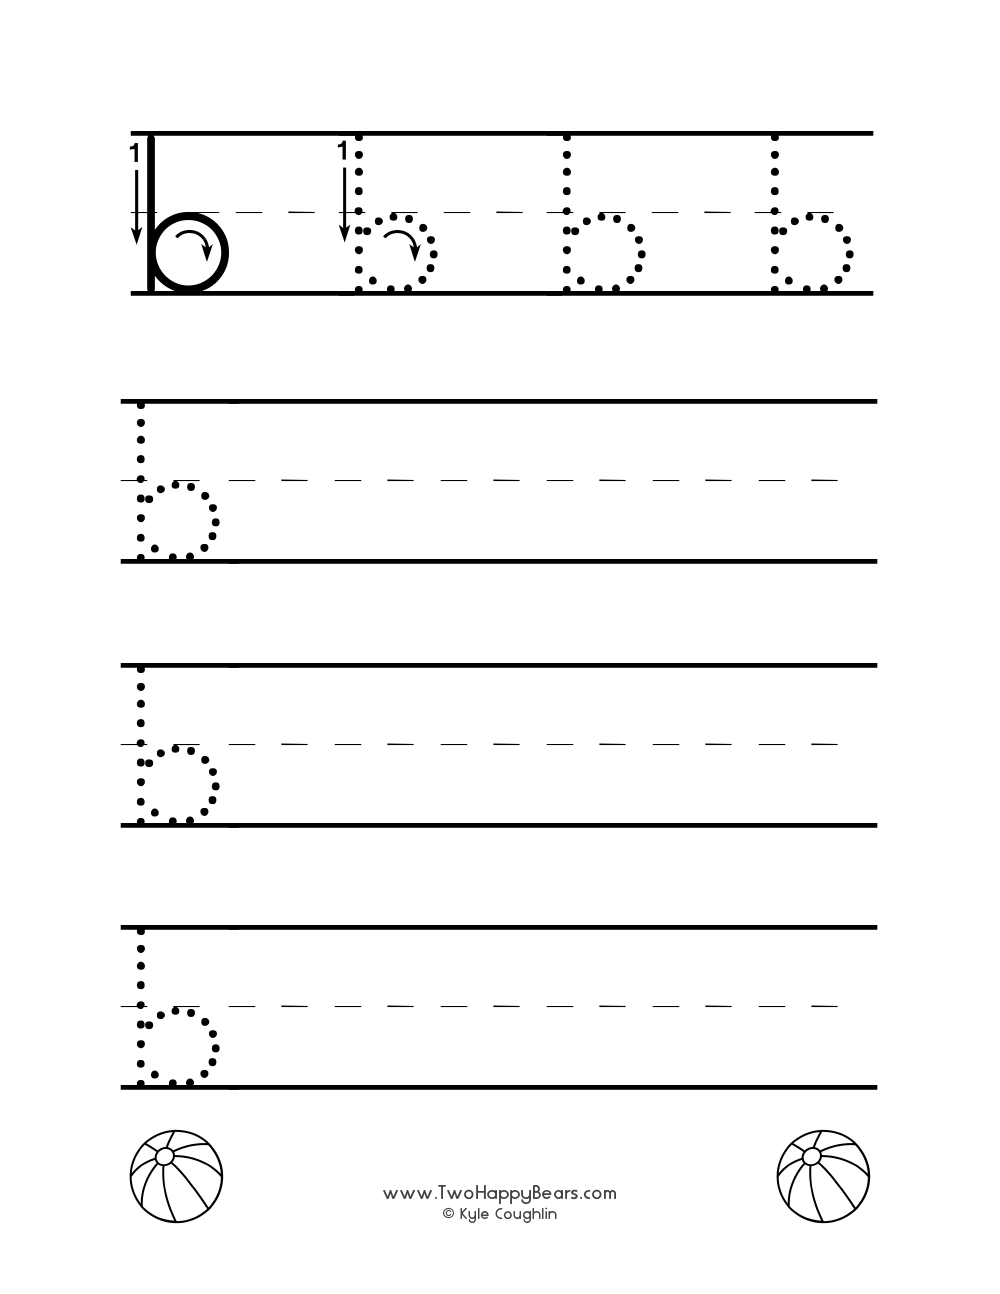 Lowercase letter B worksheet for tracing and drawing